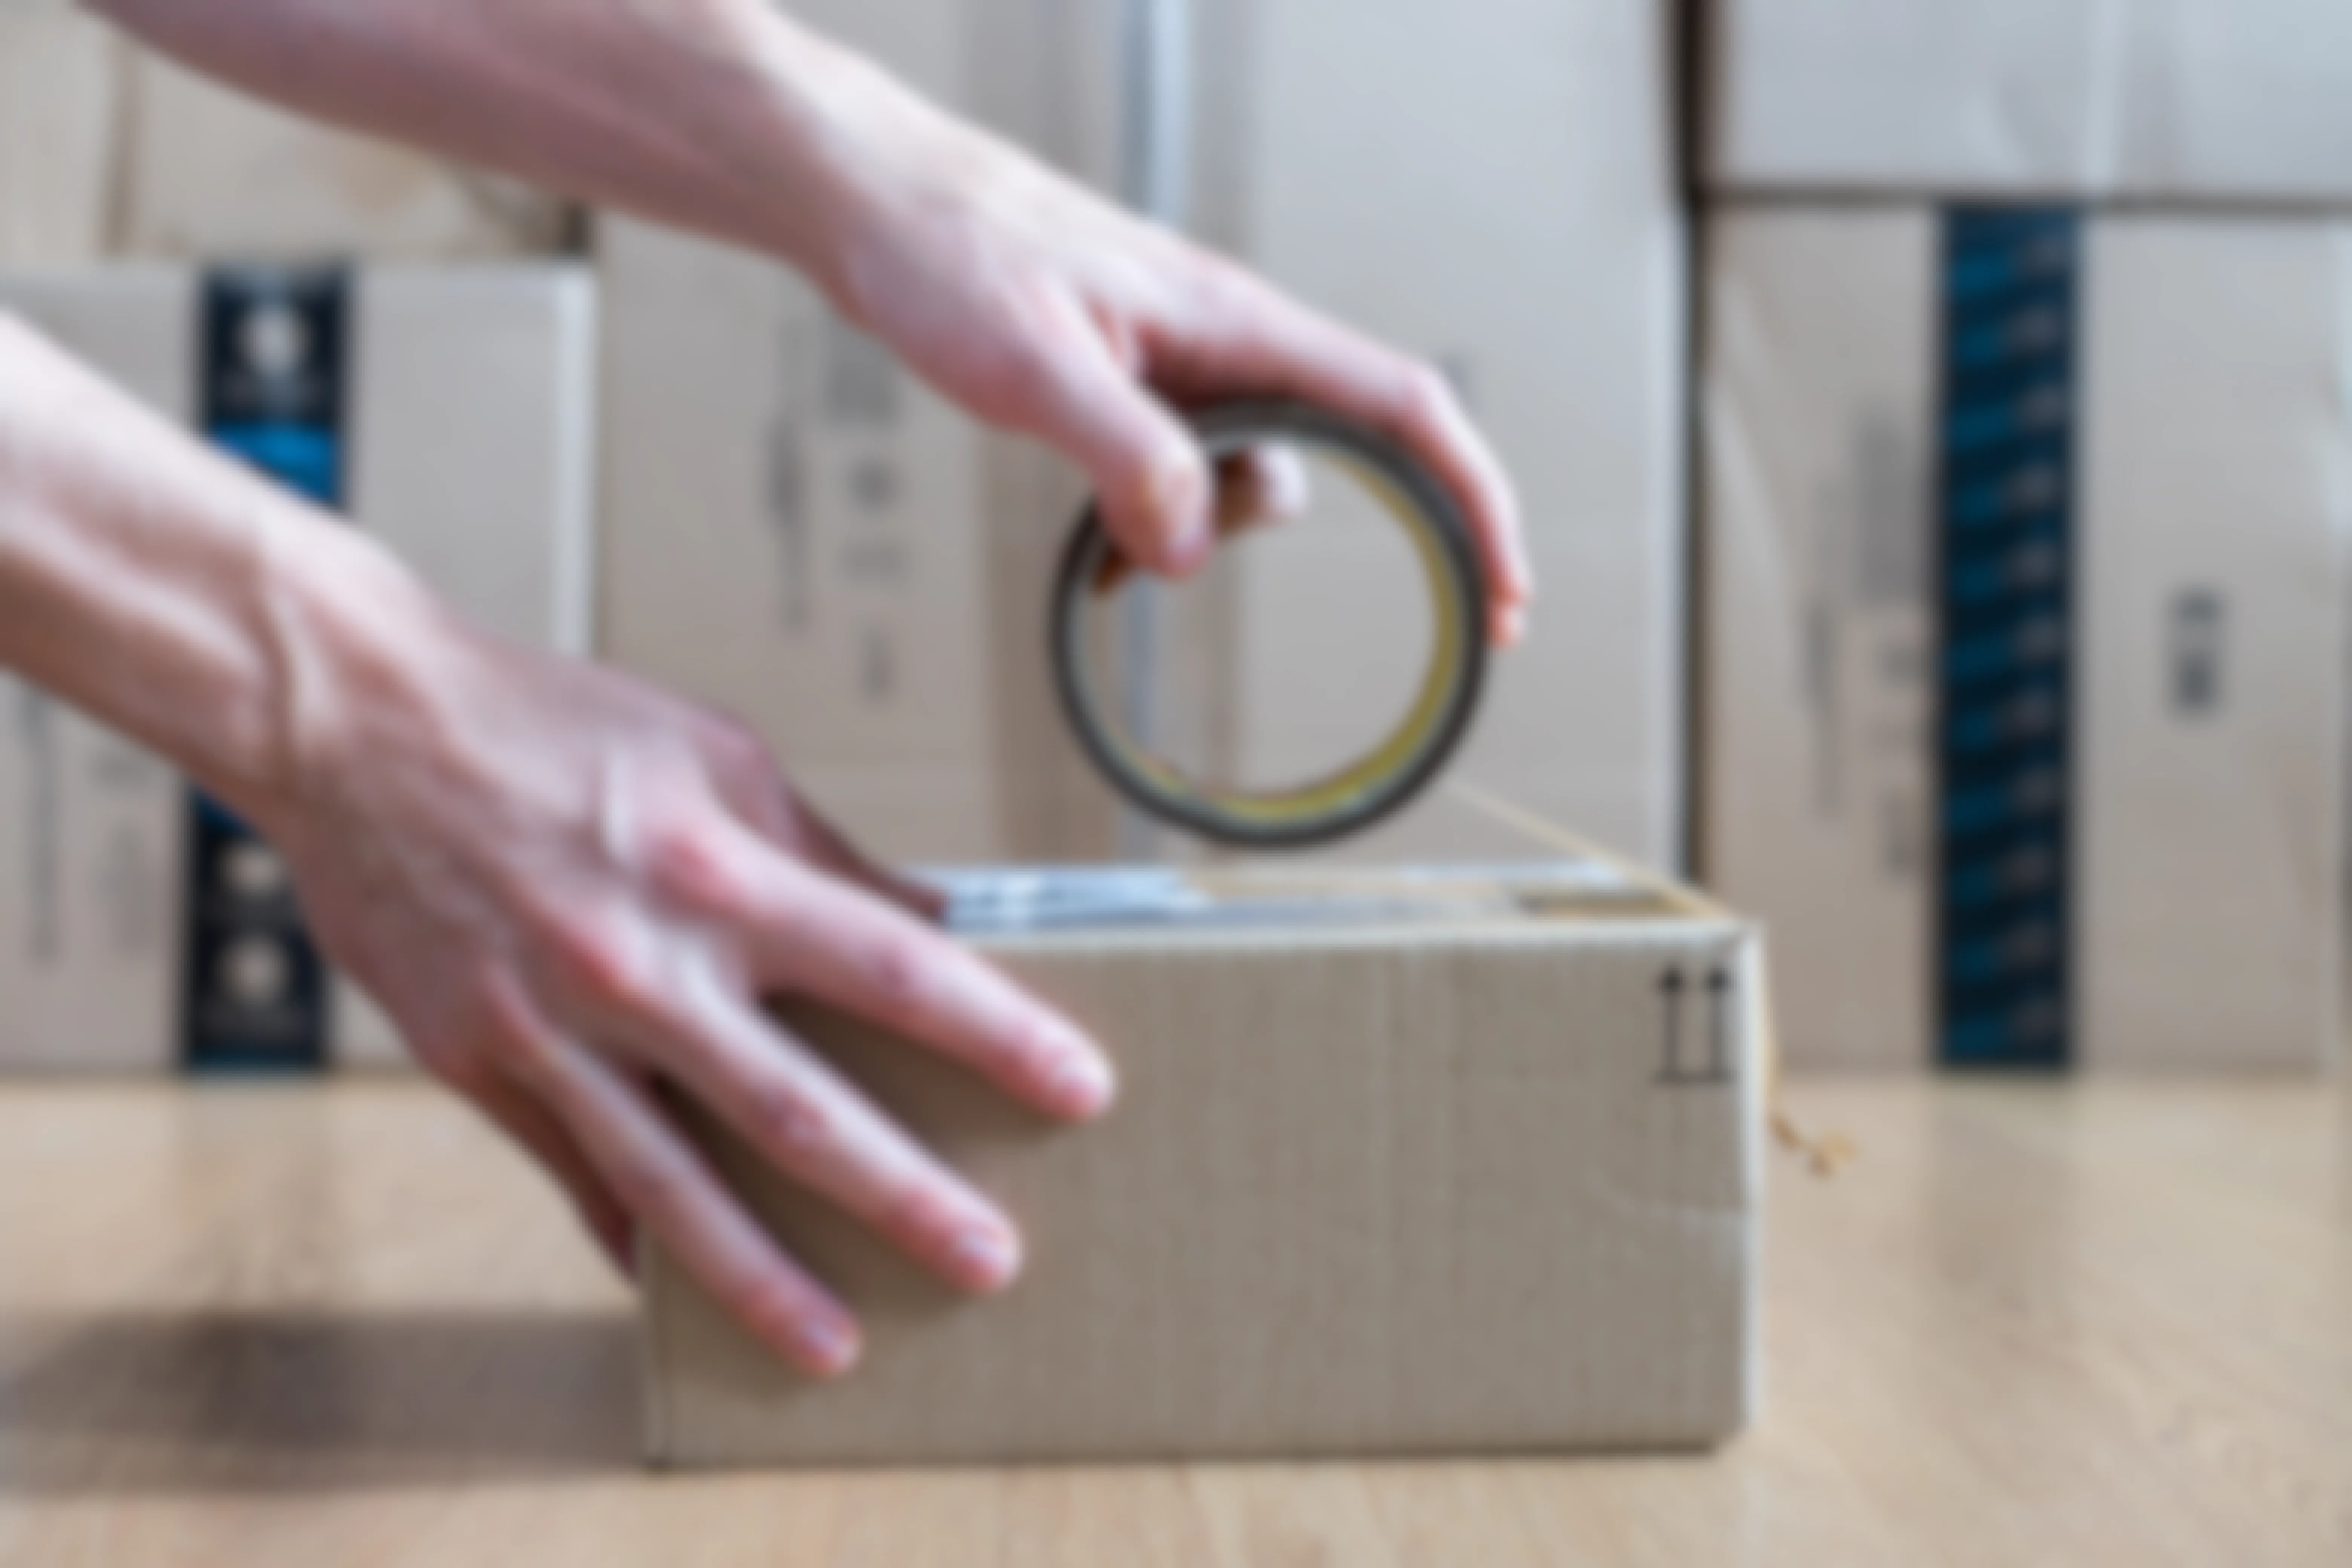 A man using packing tape to close a box. Cardboard boxes are stacked in the background.